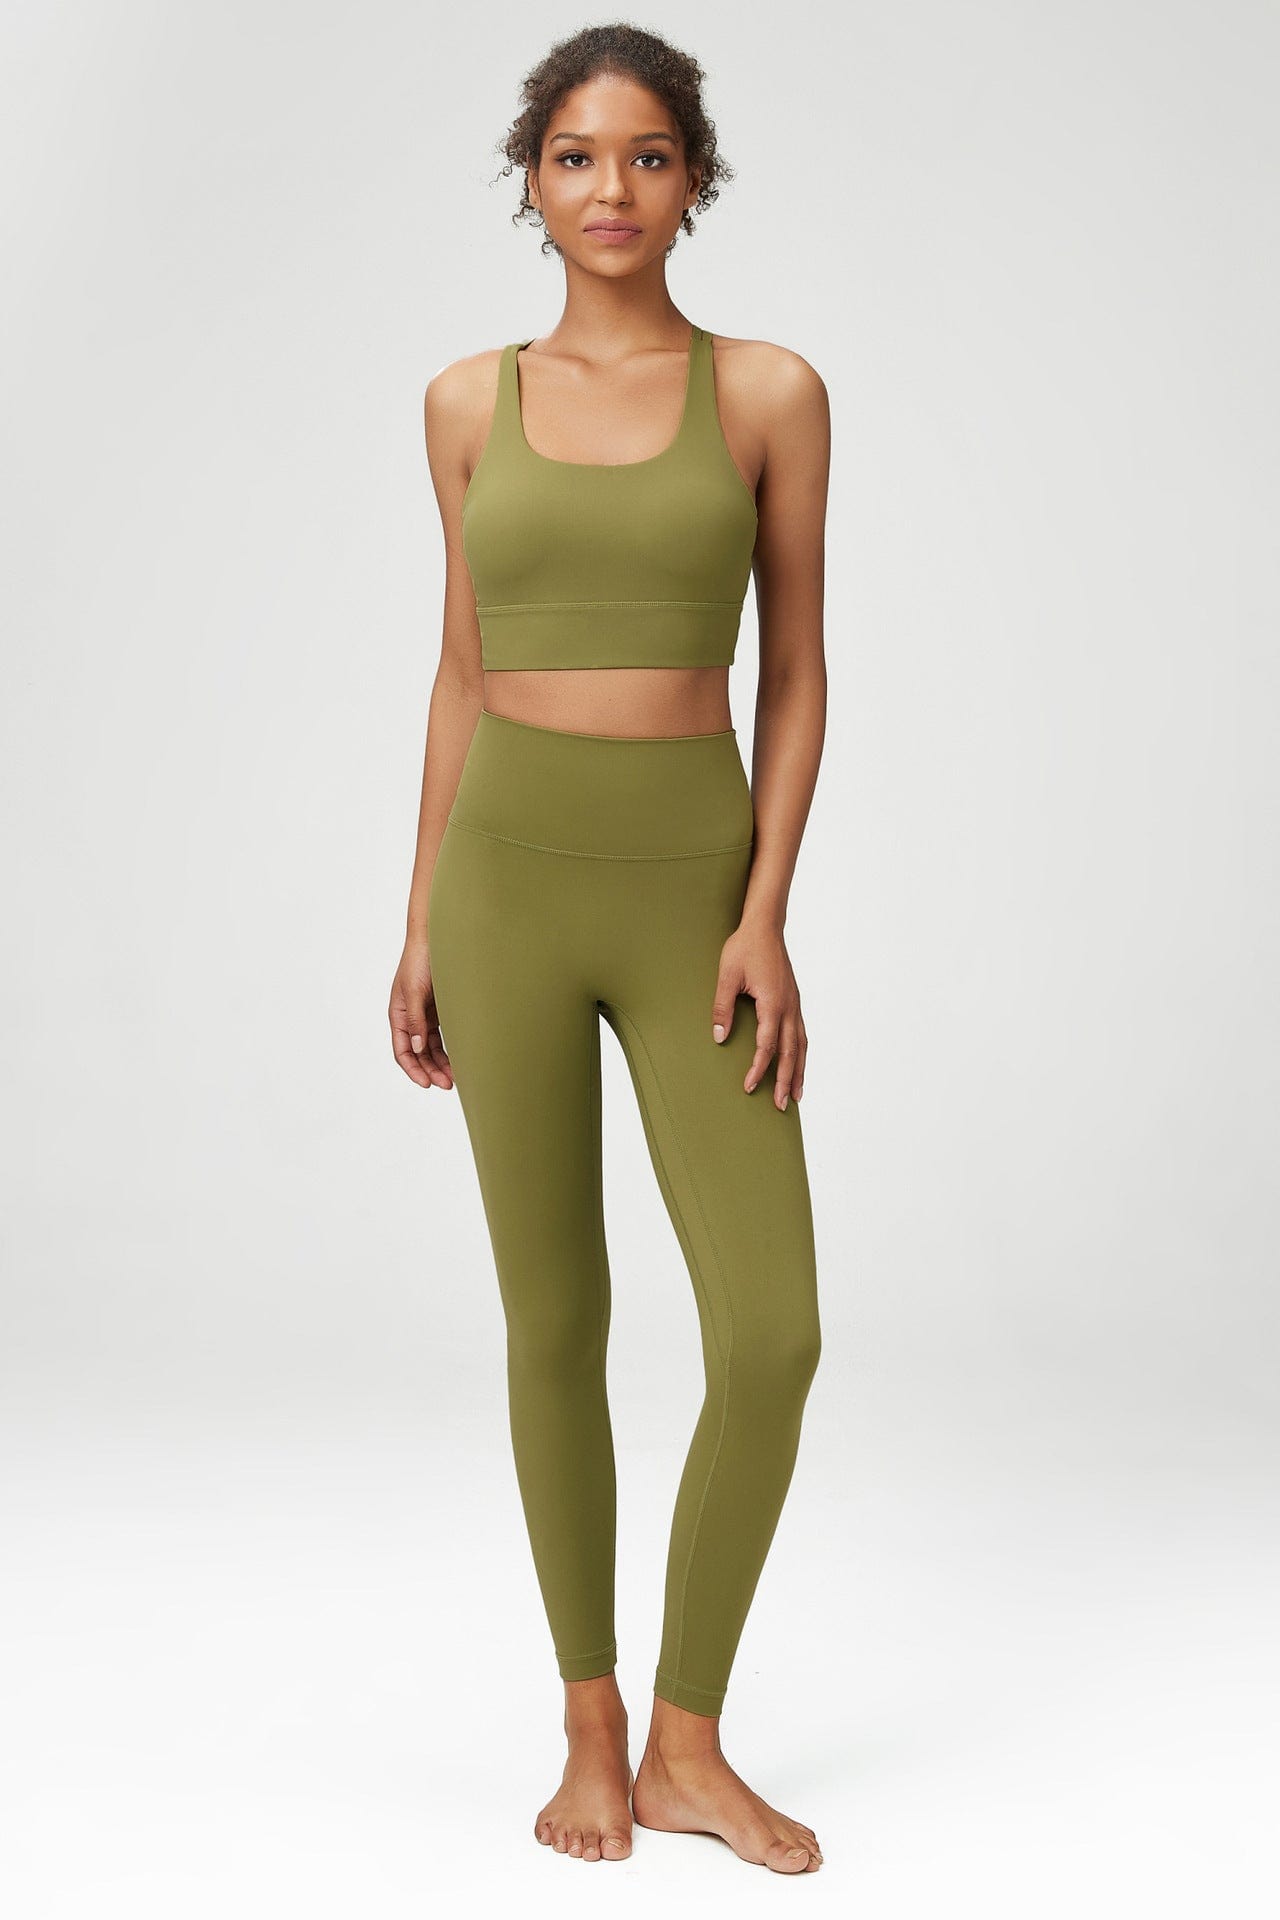 Compression Sports Top (Spearmint) – Fitness Fashioness